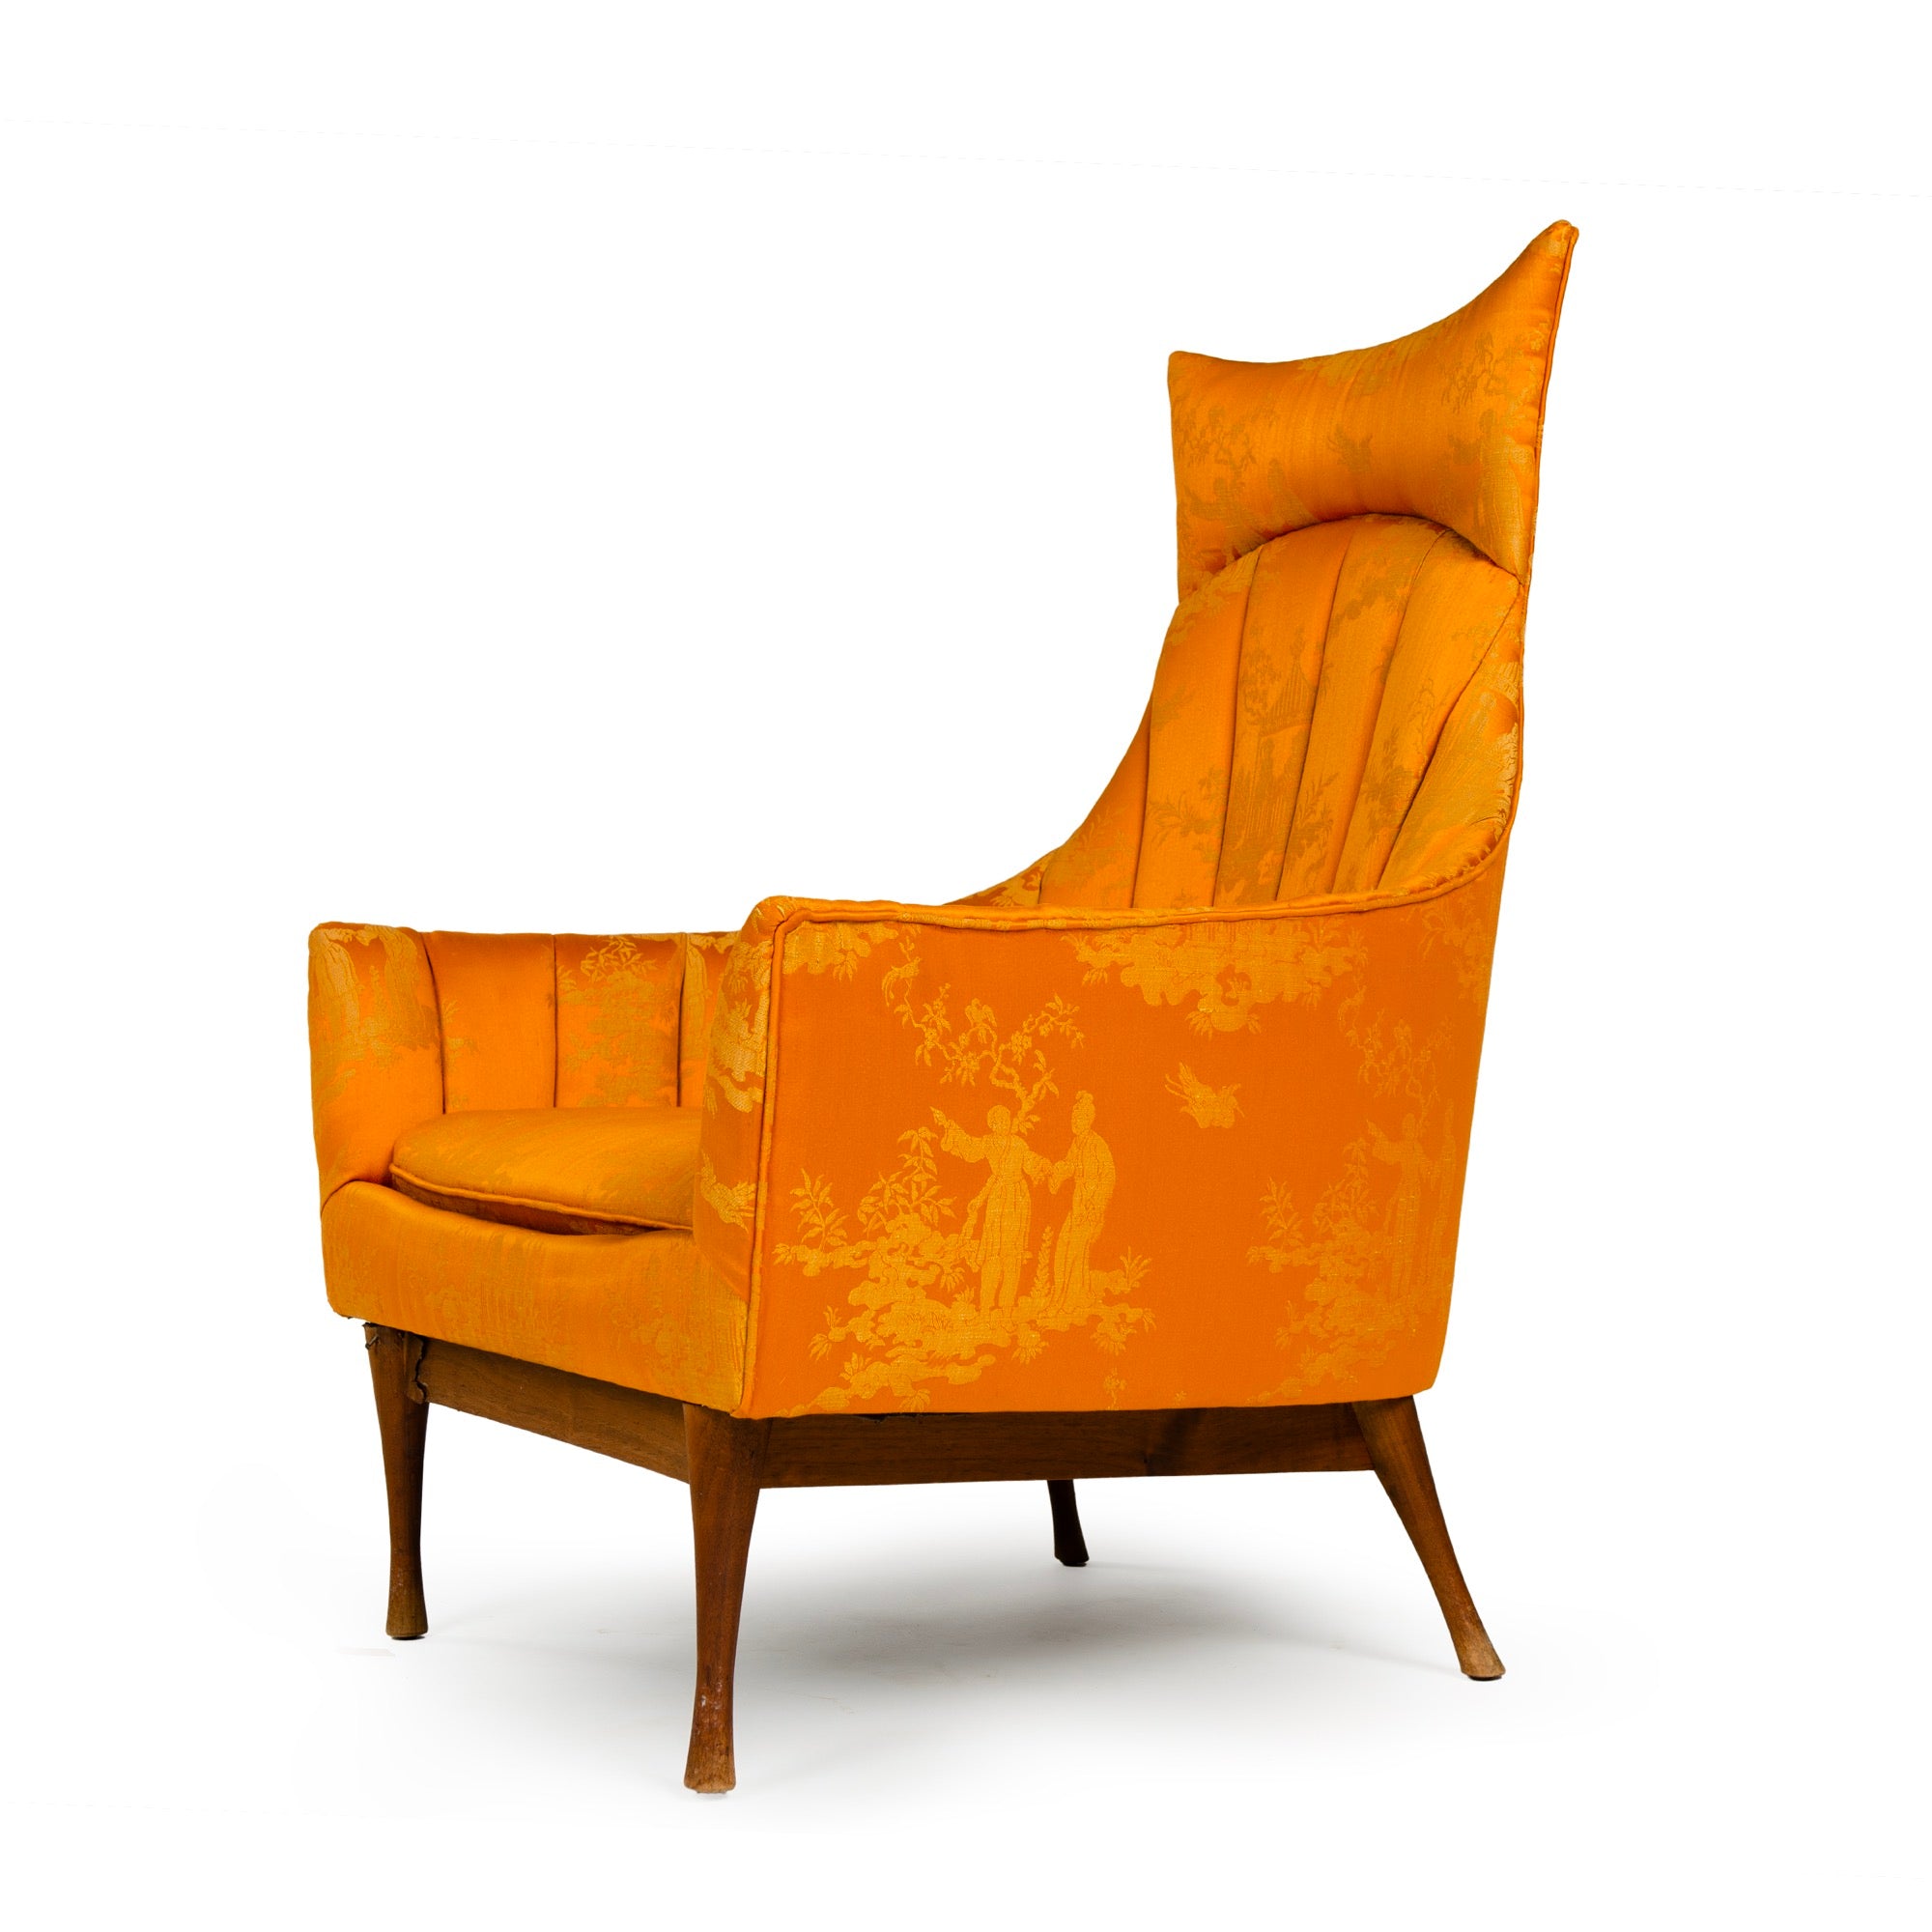 VIntage lounge chair by Paul McCobb for Widdicomb